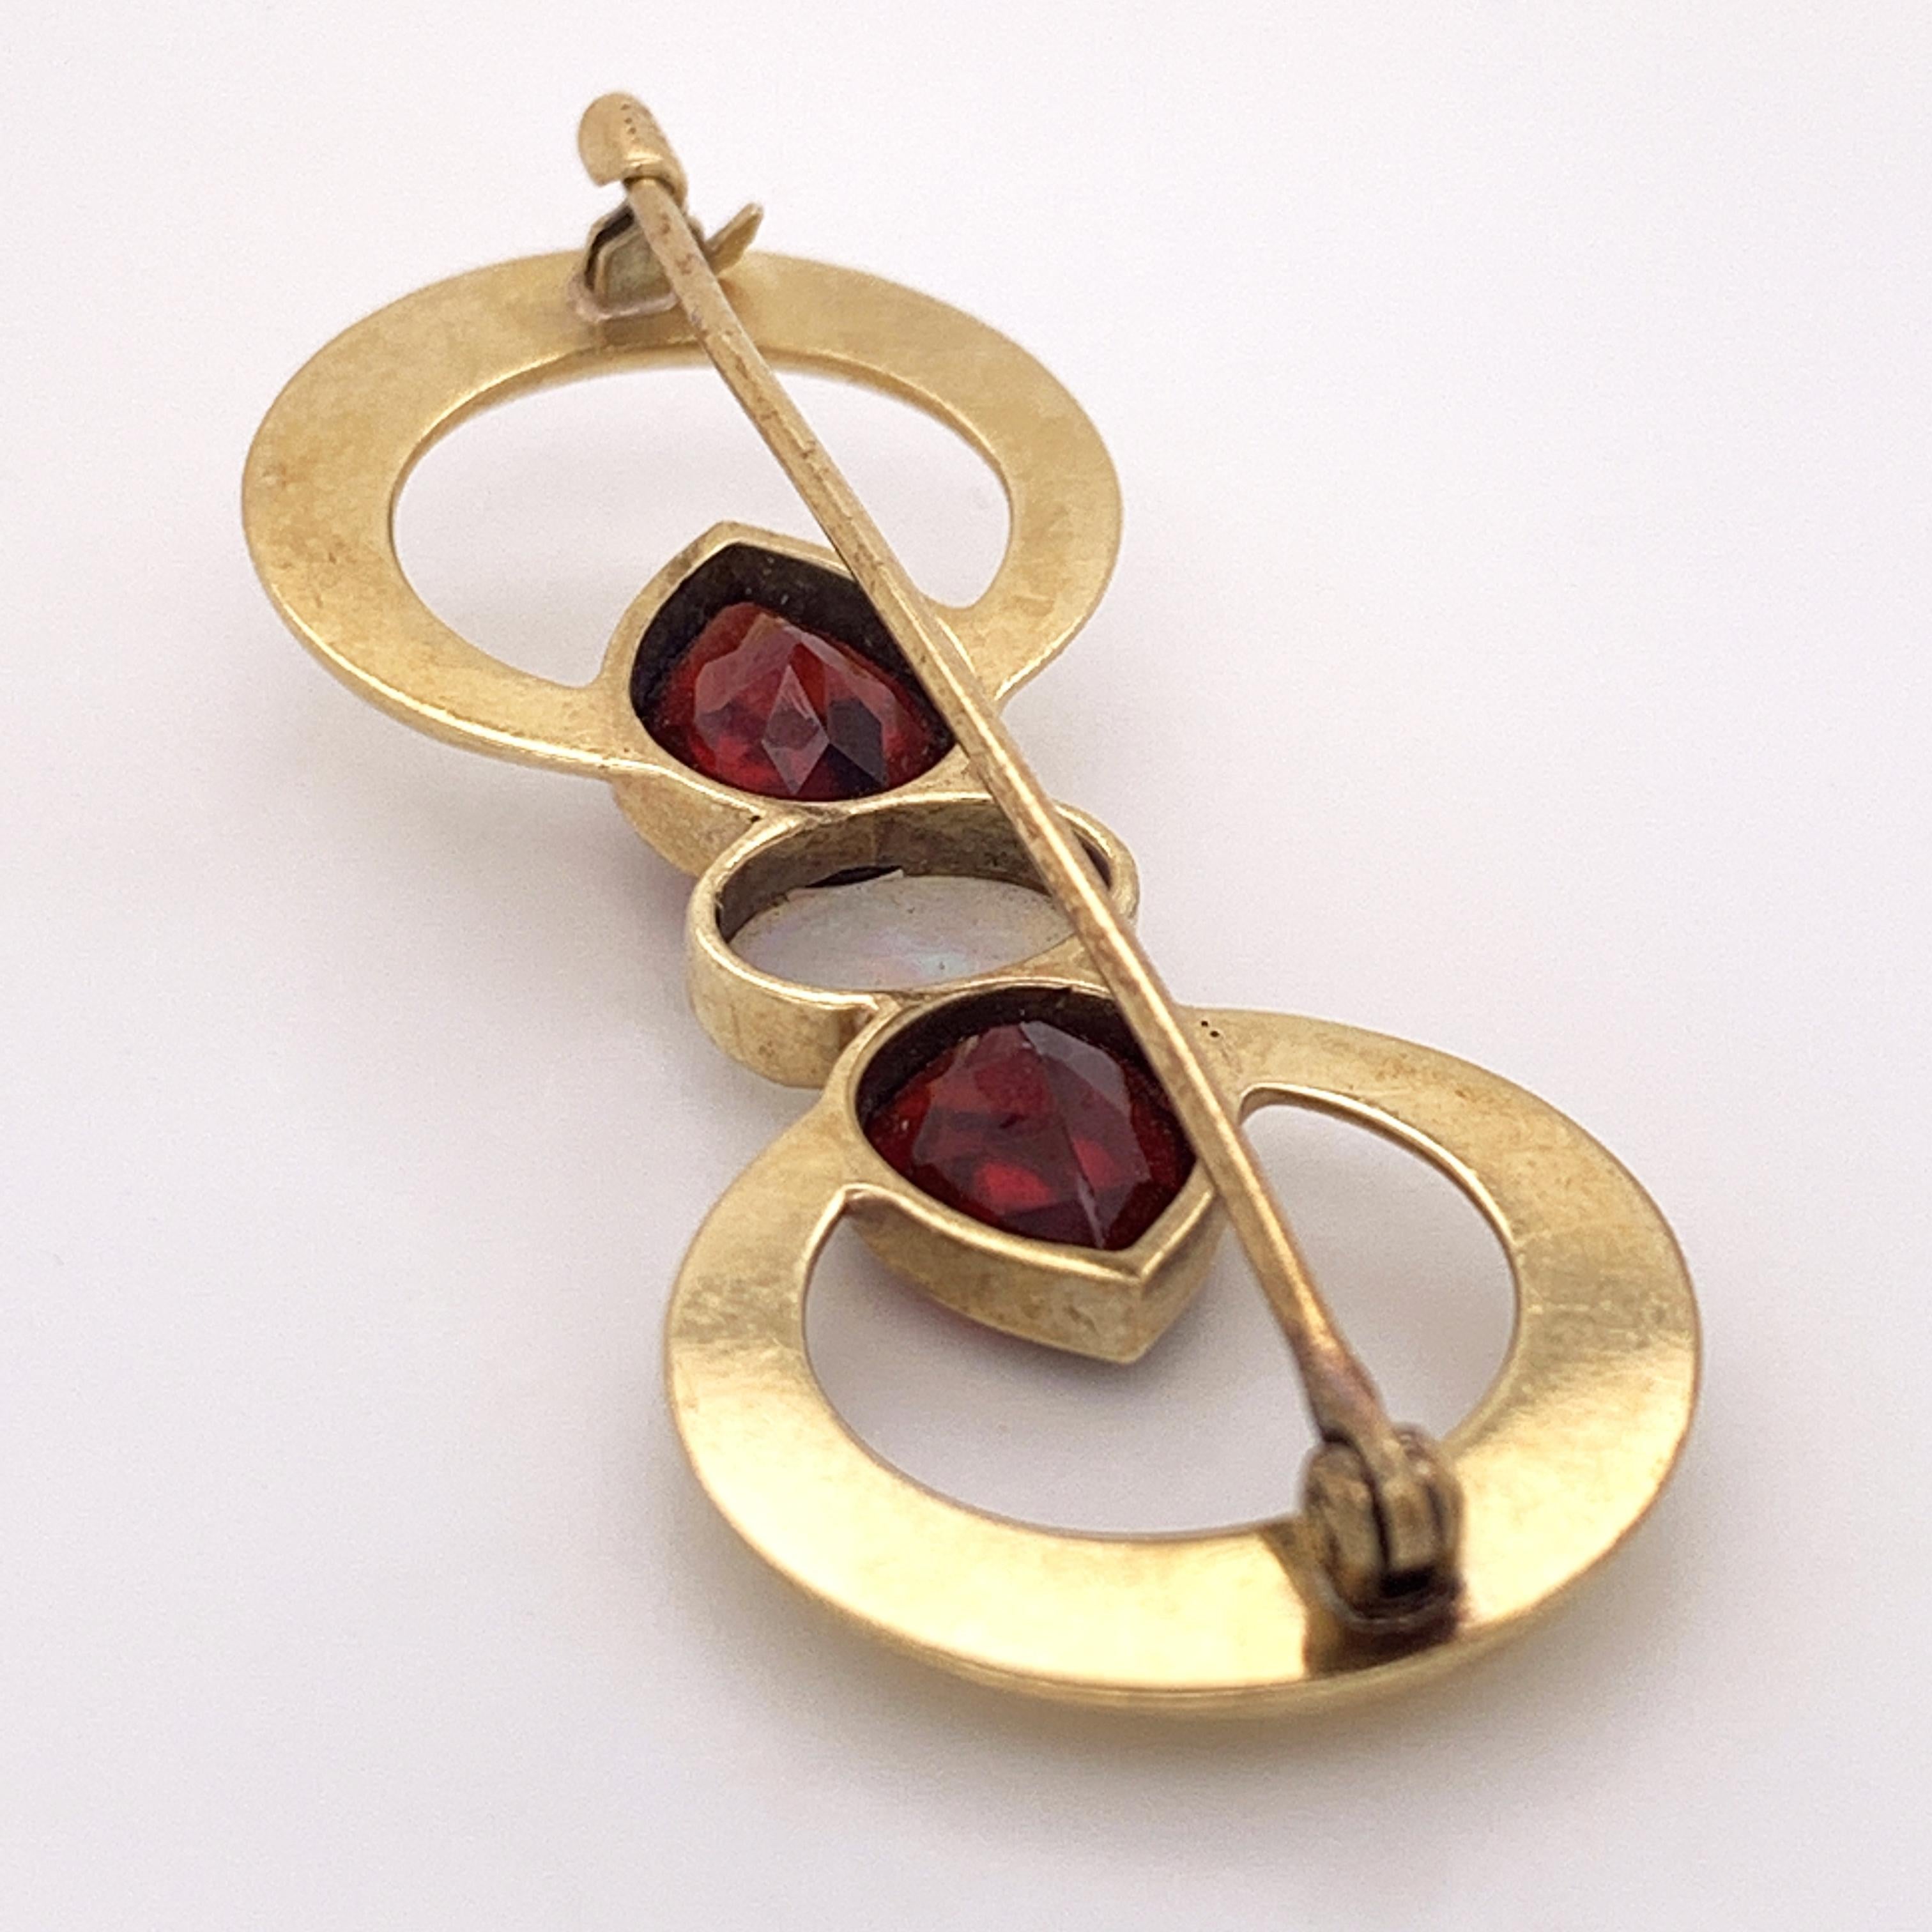 Oval Cut 18 Karat Yellow Gold Double Ring Brooch with Opal and Garnet Stones